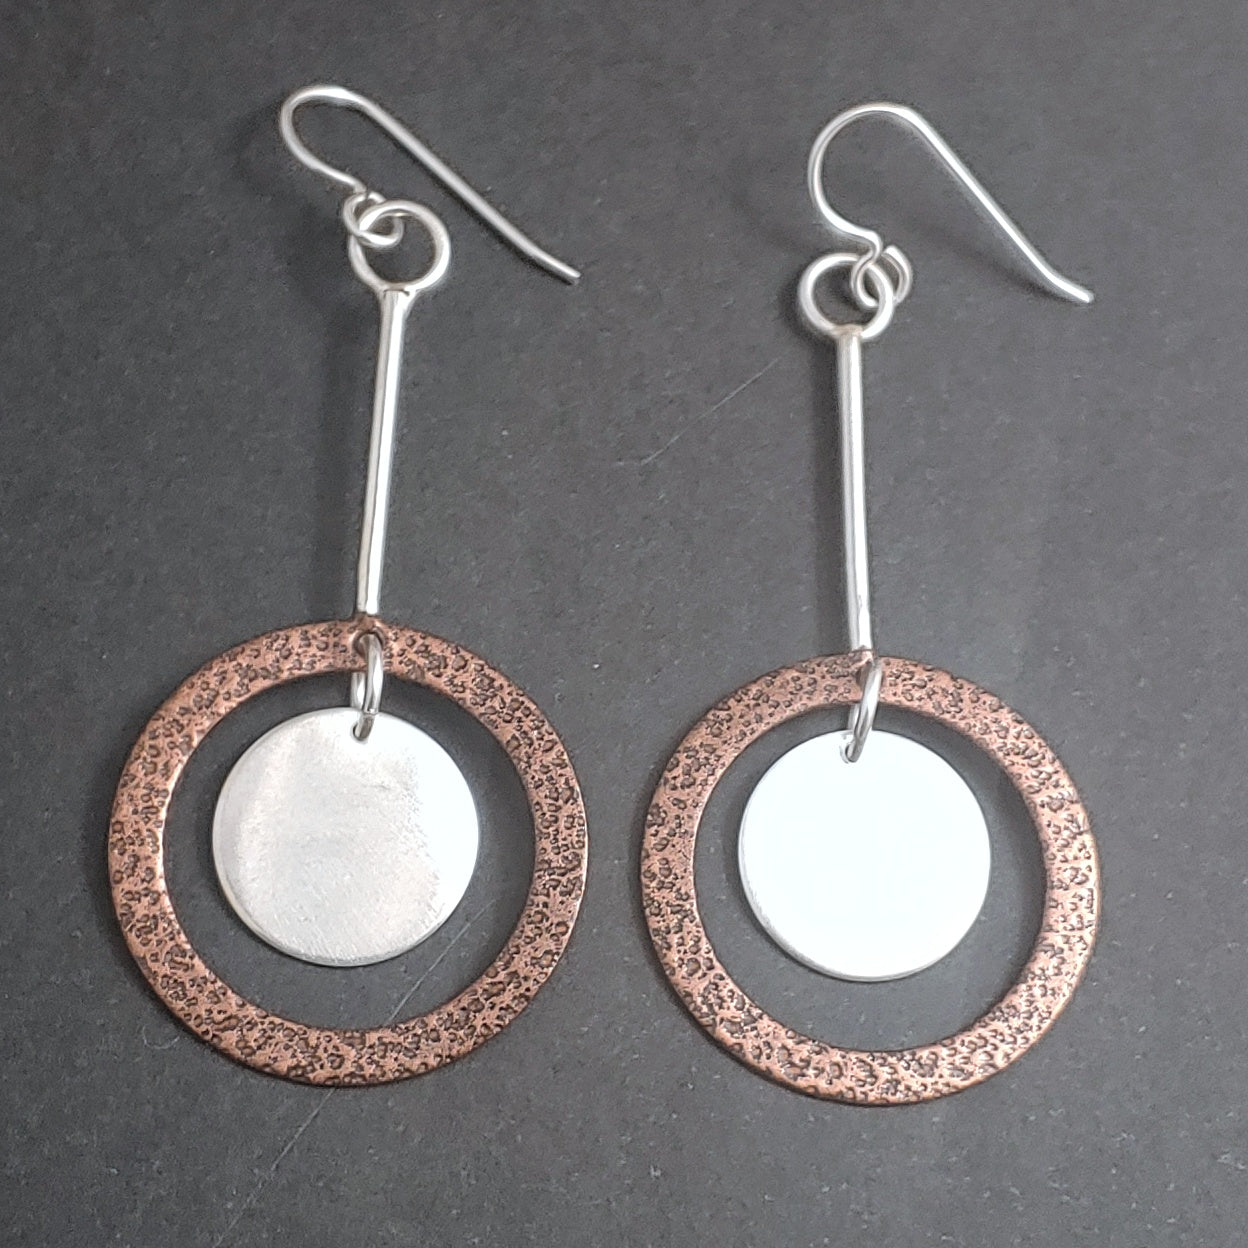 The Double Round Earrings - Copper and Silver